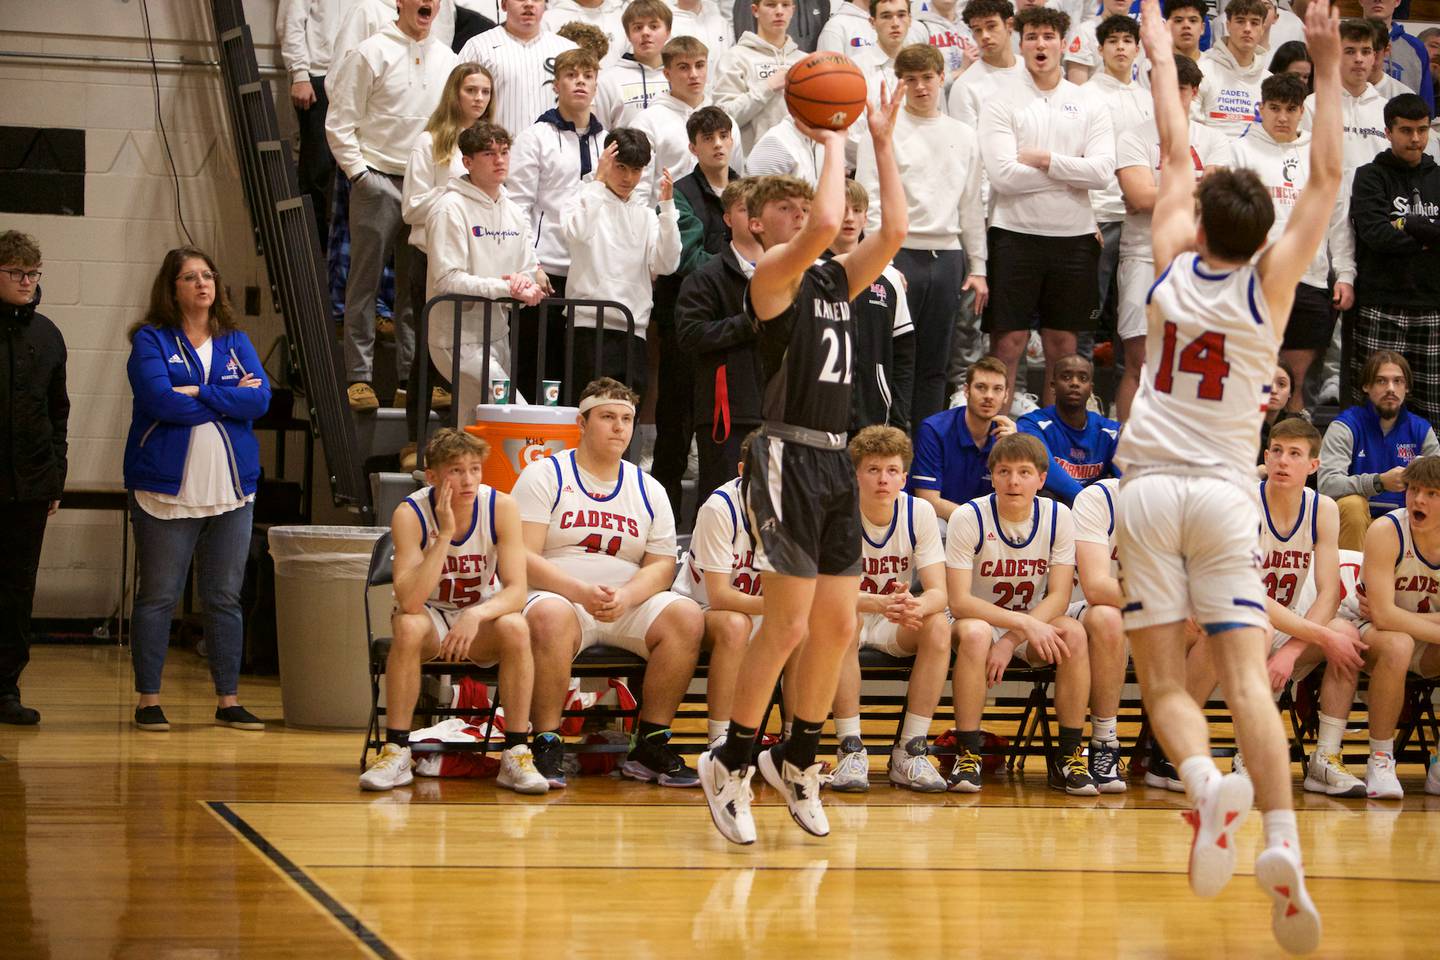 Kaneland's Johnny Spallasso shoots a three pointer against Marmion Academy at the Class 3A Regional Final at Kaneland on Saturday, Feb.25, 2023.